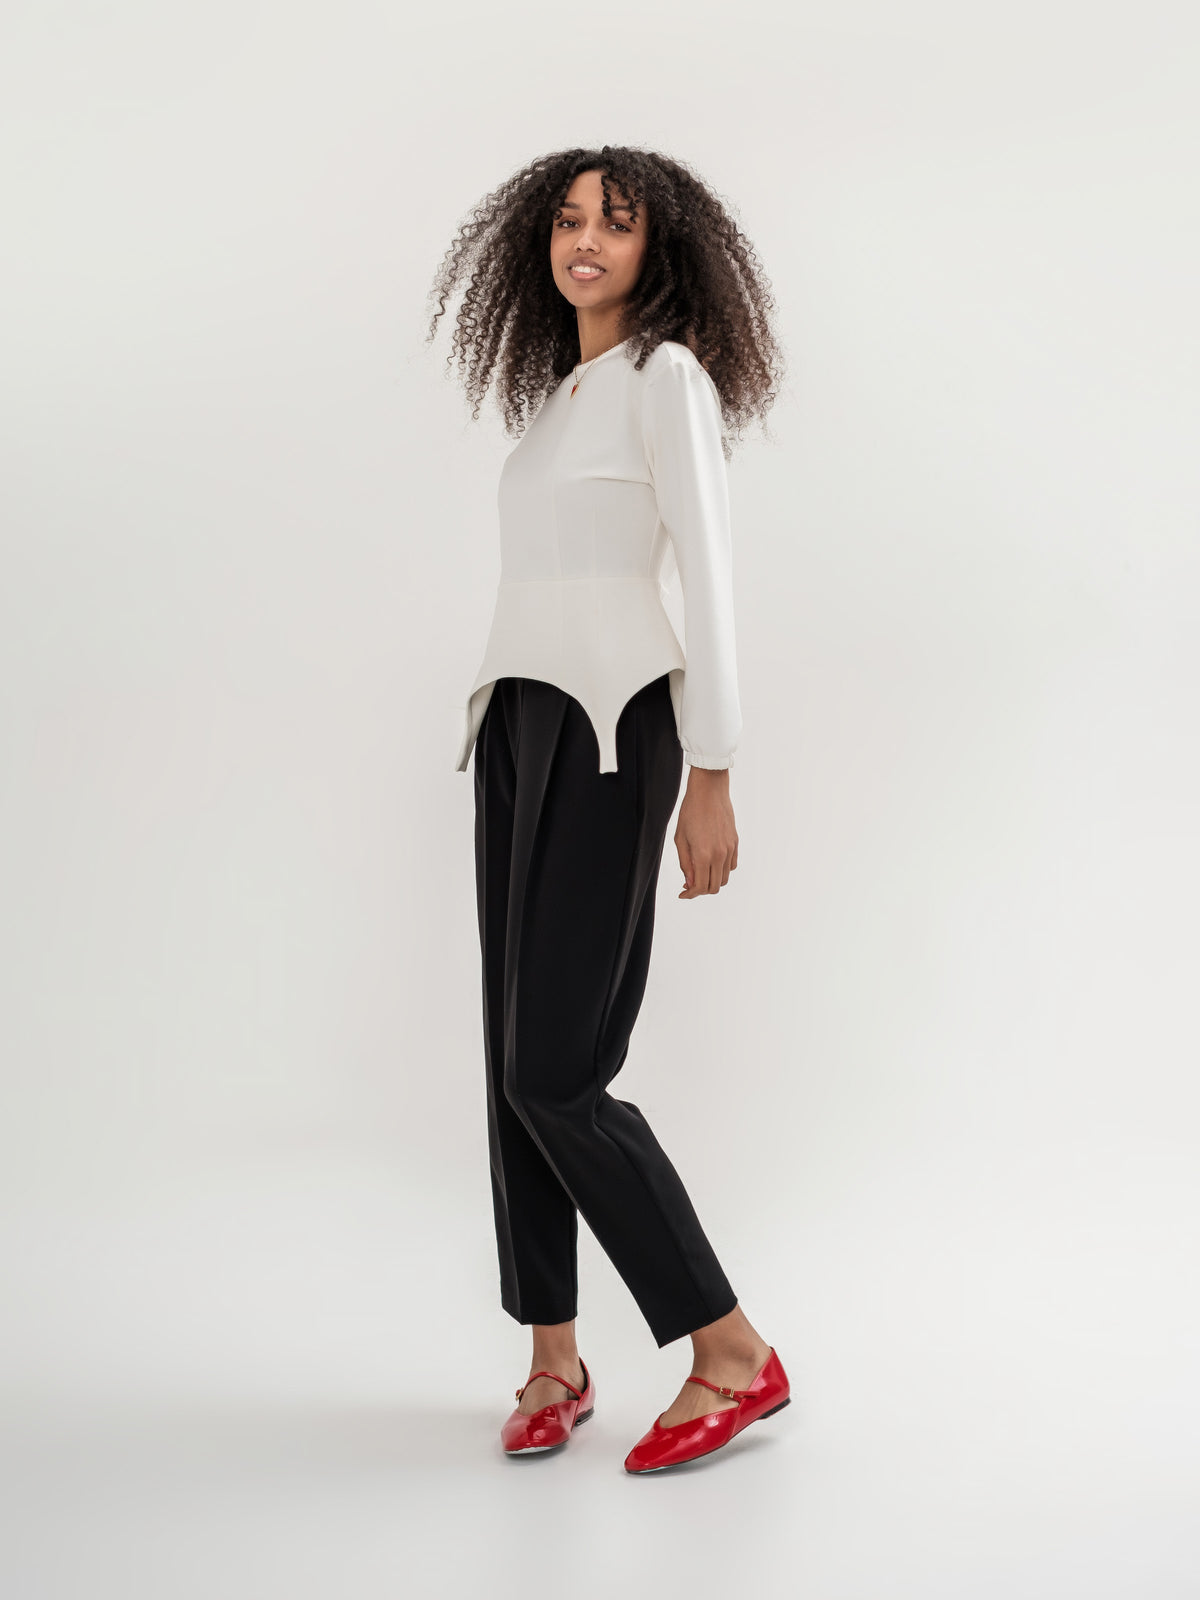 Formal black trousers and white garter inspired top with long sleeves 